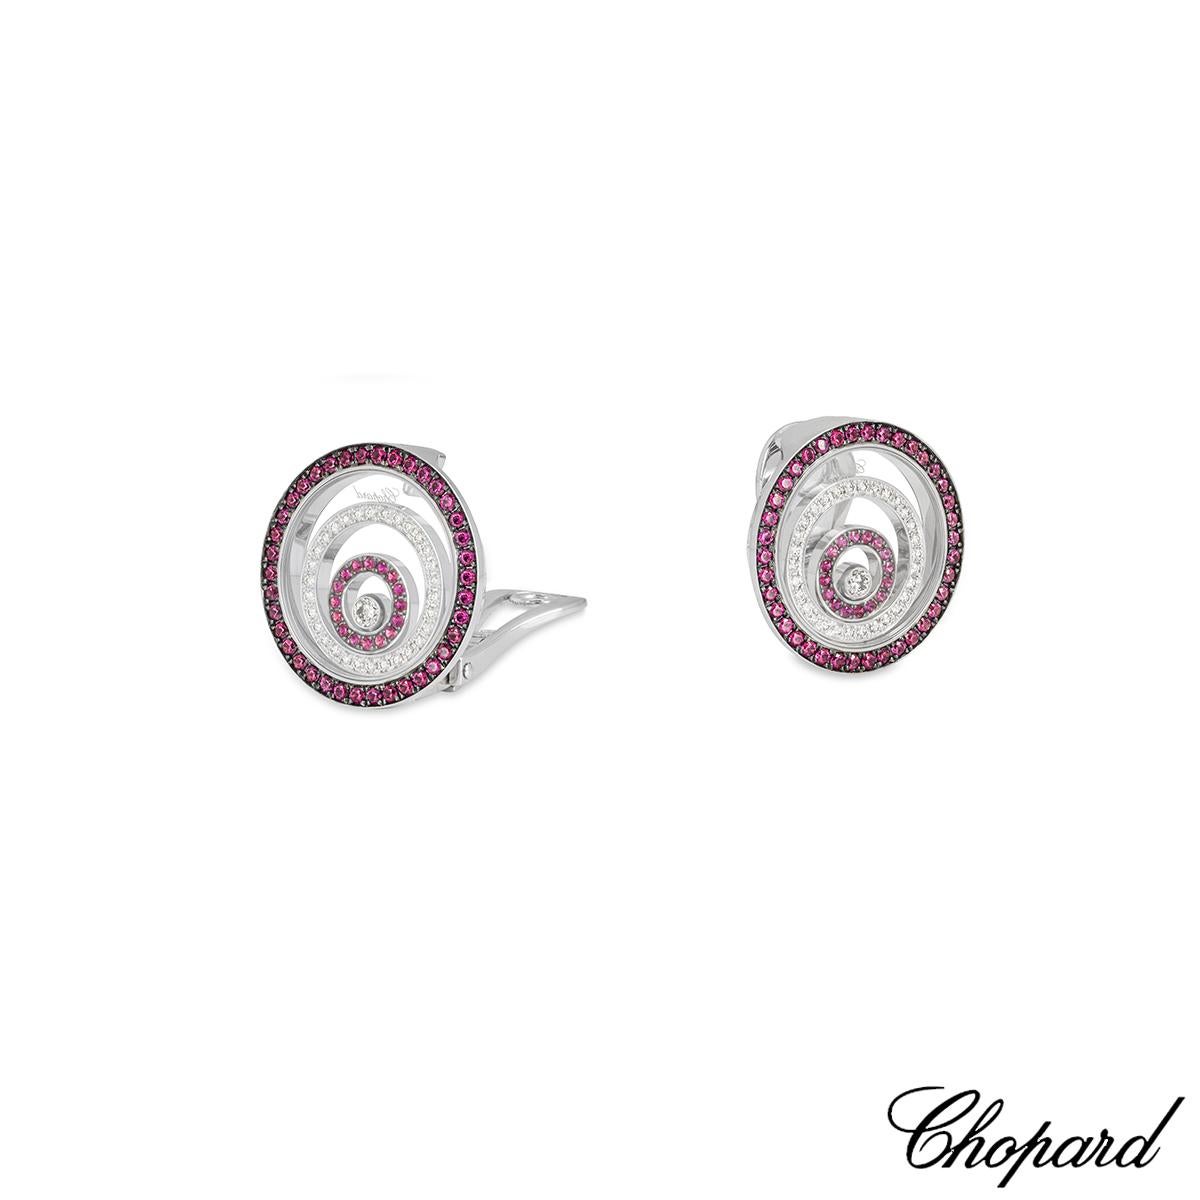 Round Cut Chopard White Gold Ruby & Diamond Happy Spirit Earrings 84/5425-1002 For Sale